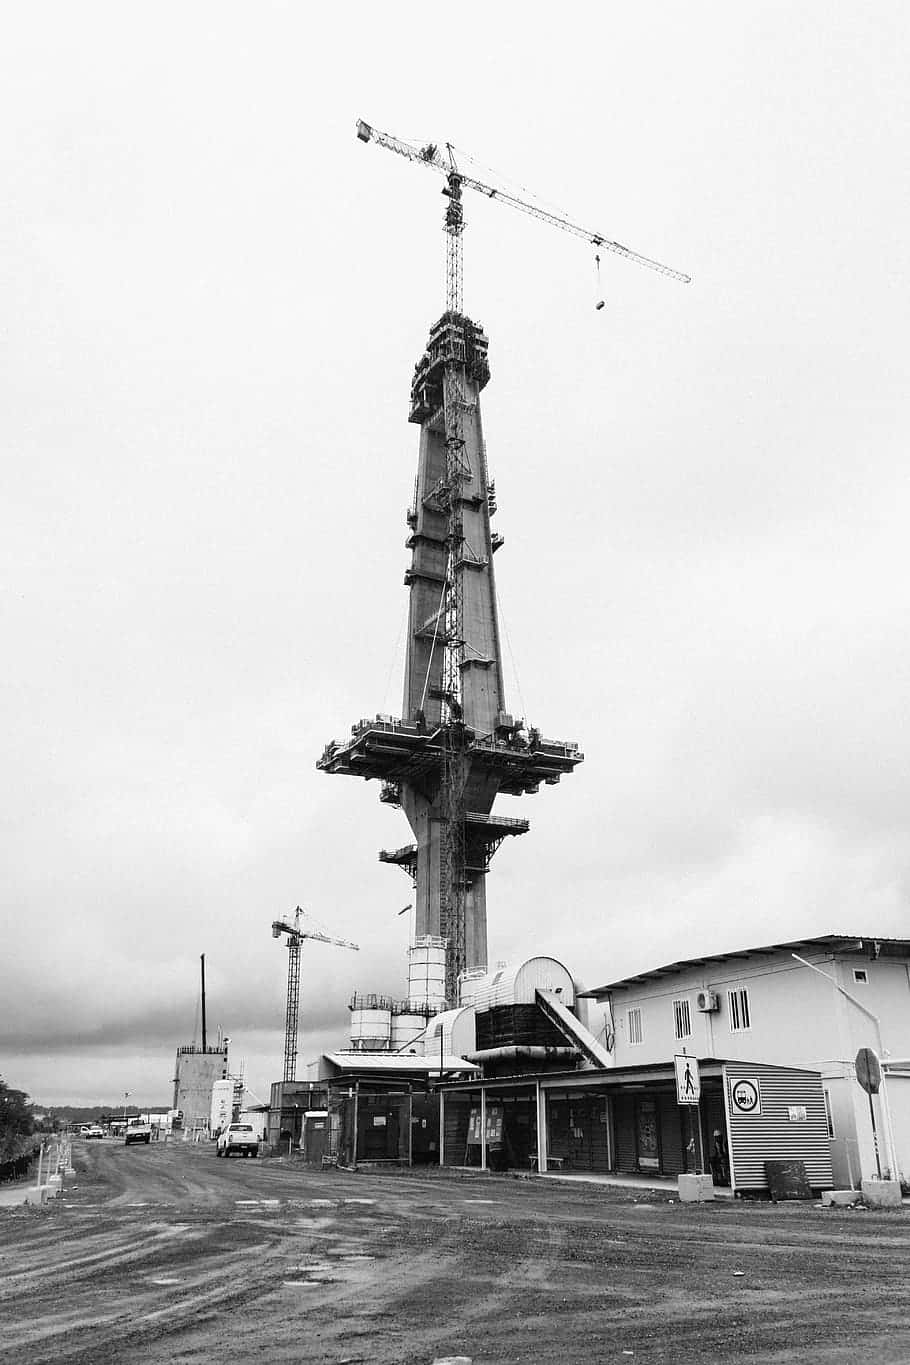 The Panama Canal Tower Crane Wallpaper